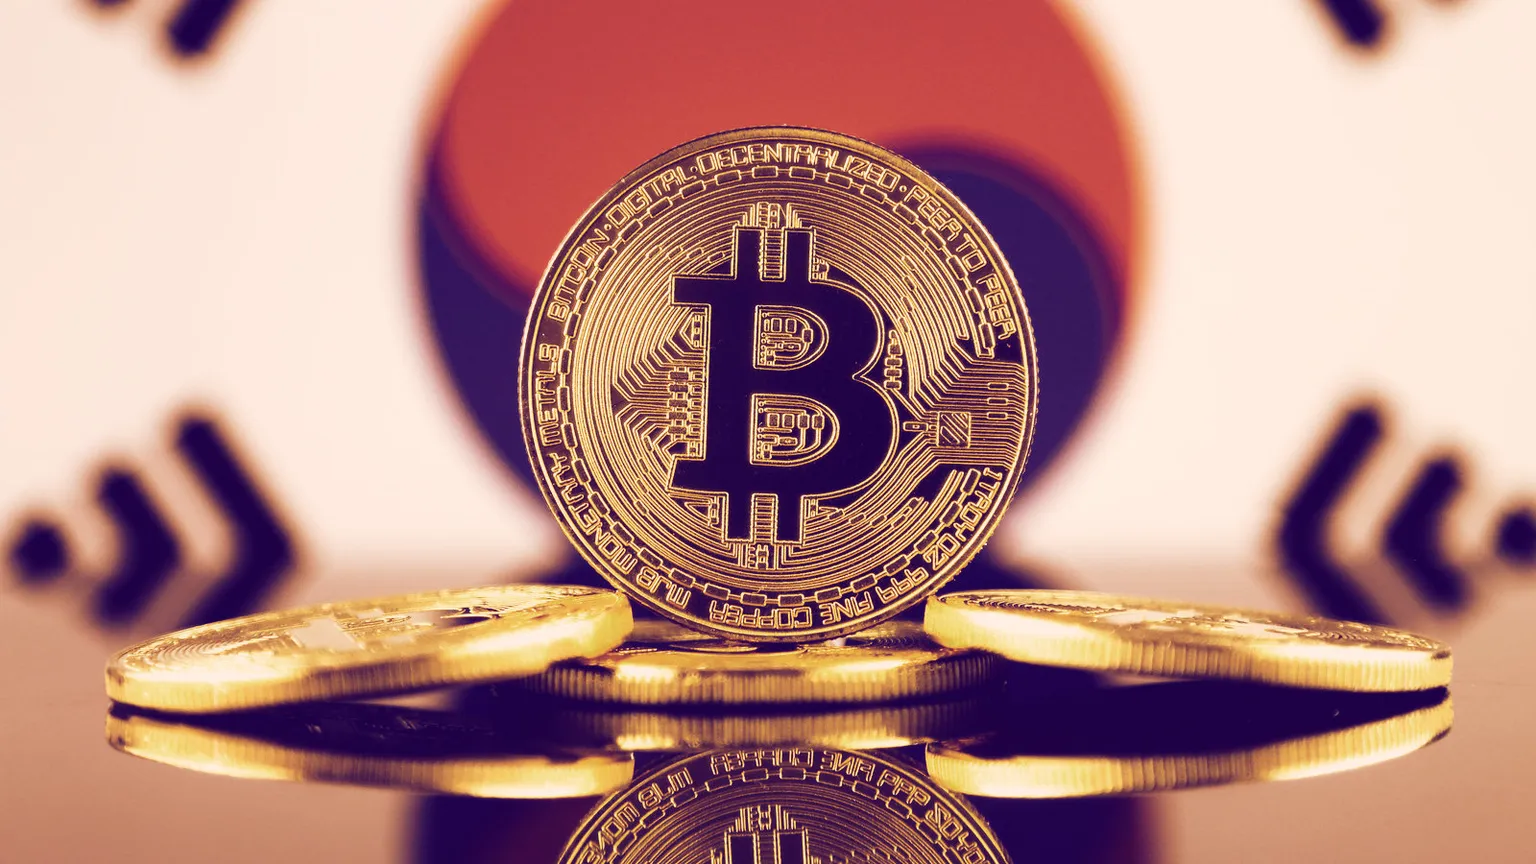 South Korea and Bitcoin. Image: Shutterstock